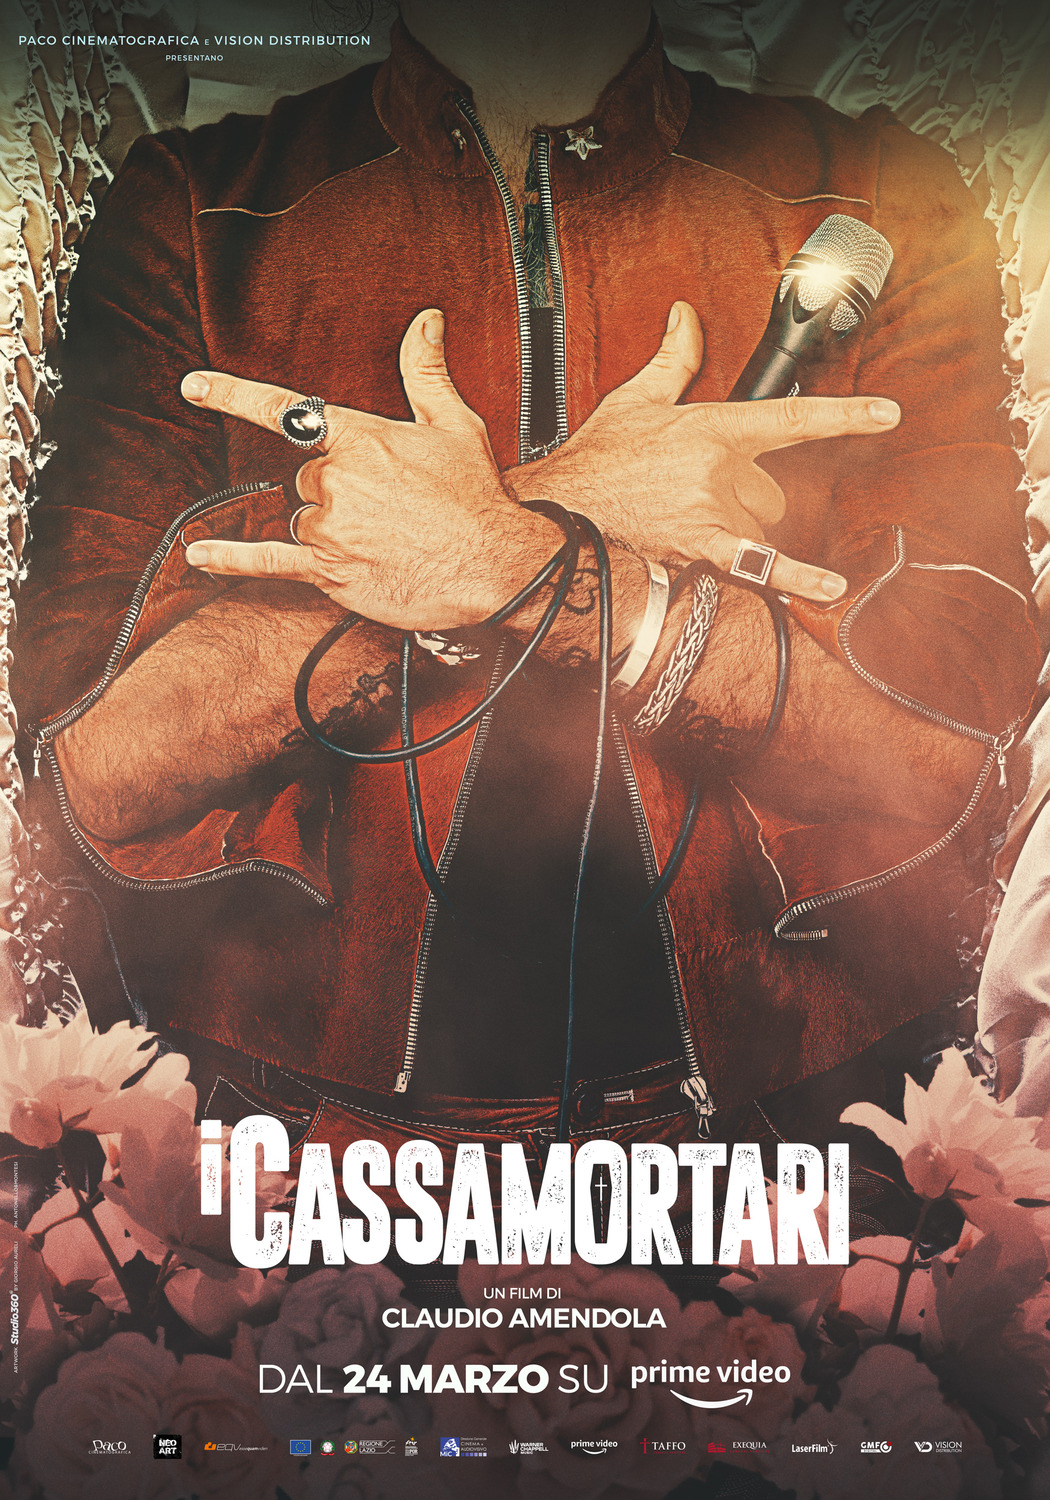 Extra Large Movie Poster Image for I cassamortari (#1 of 2)